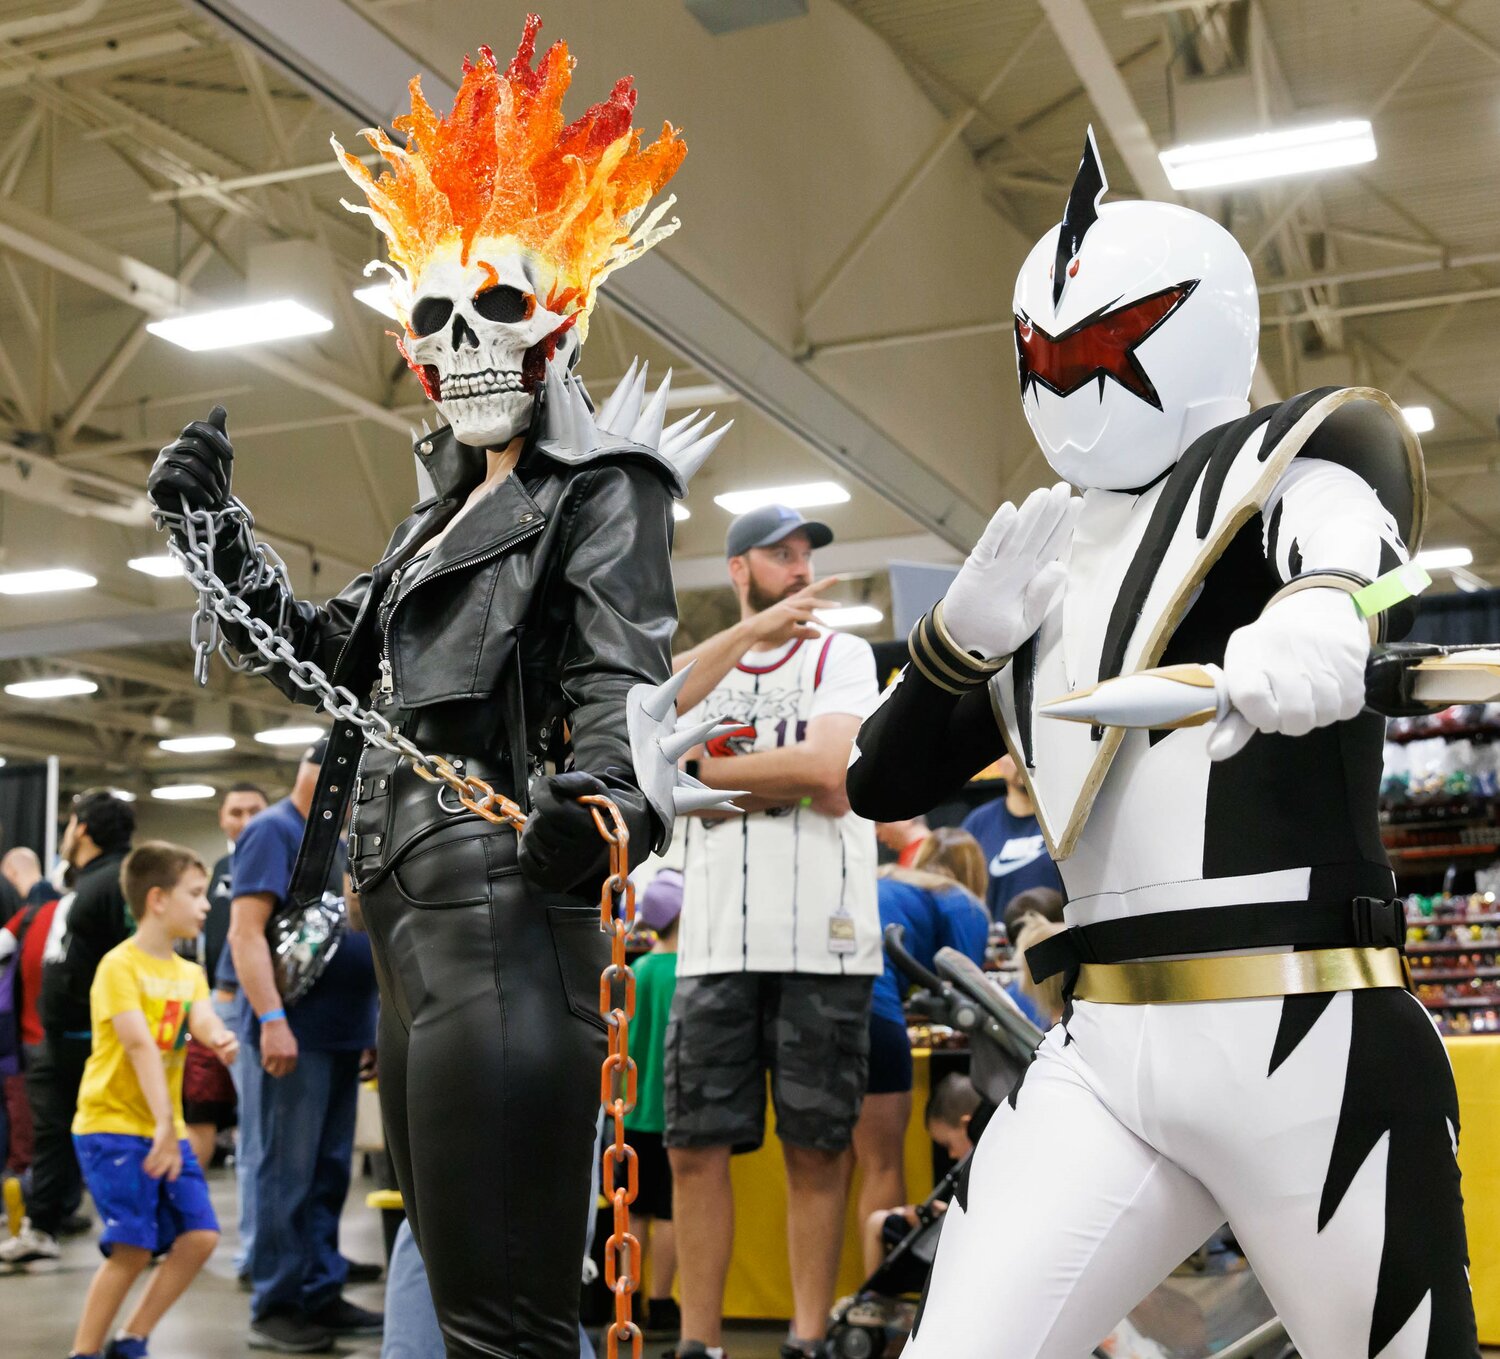 Where the heroes hang out Comic Con brings thousands to Crown center